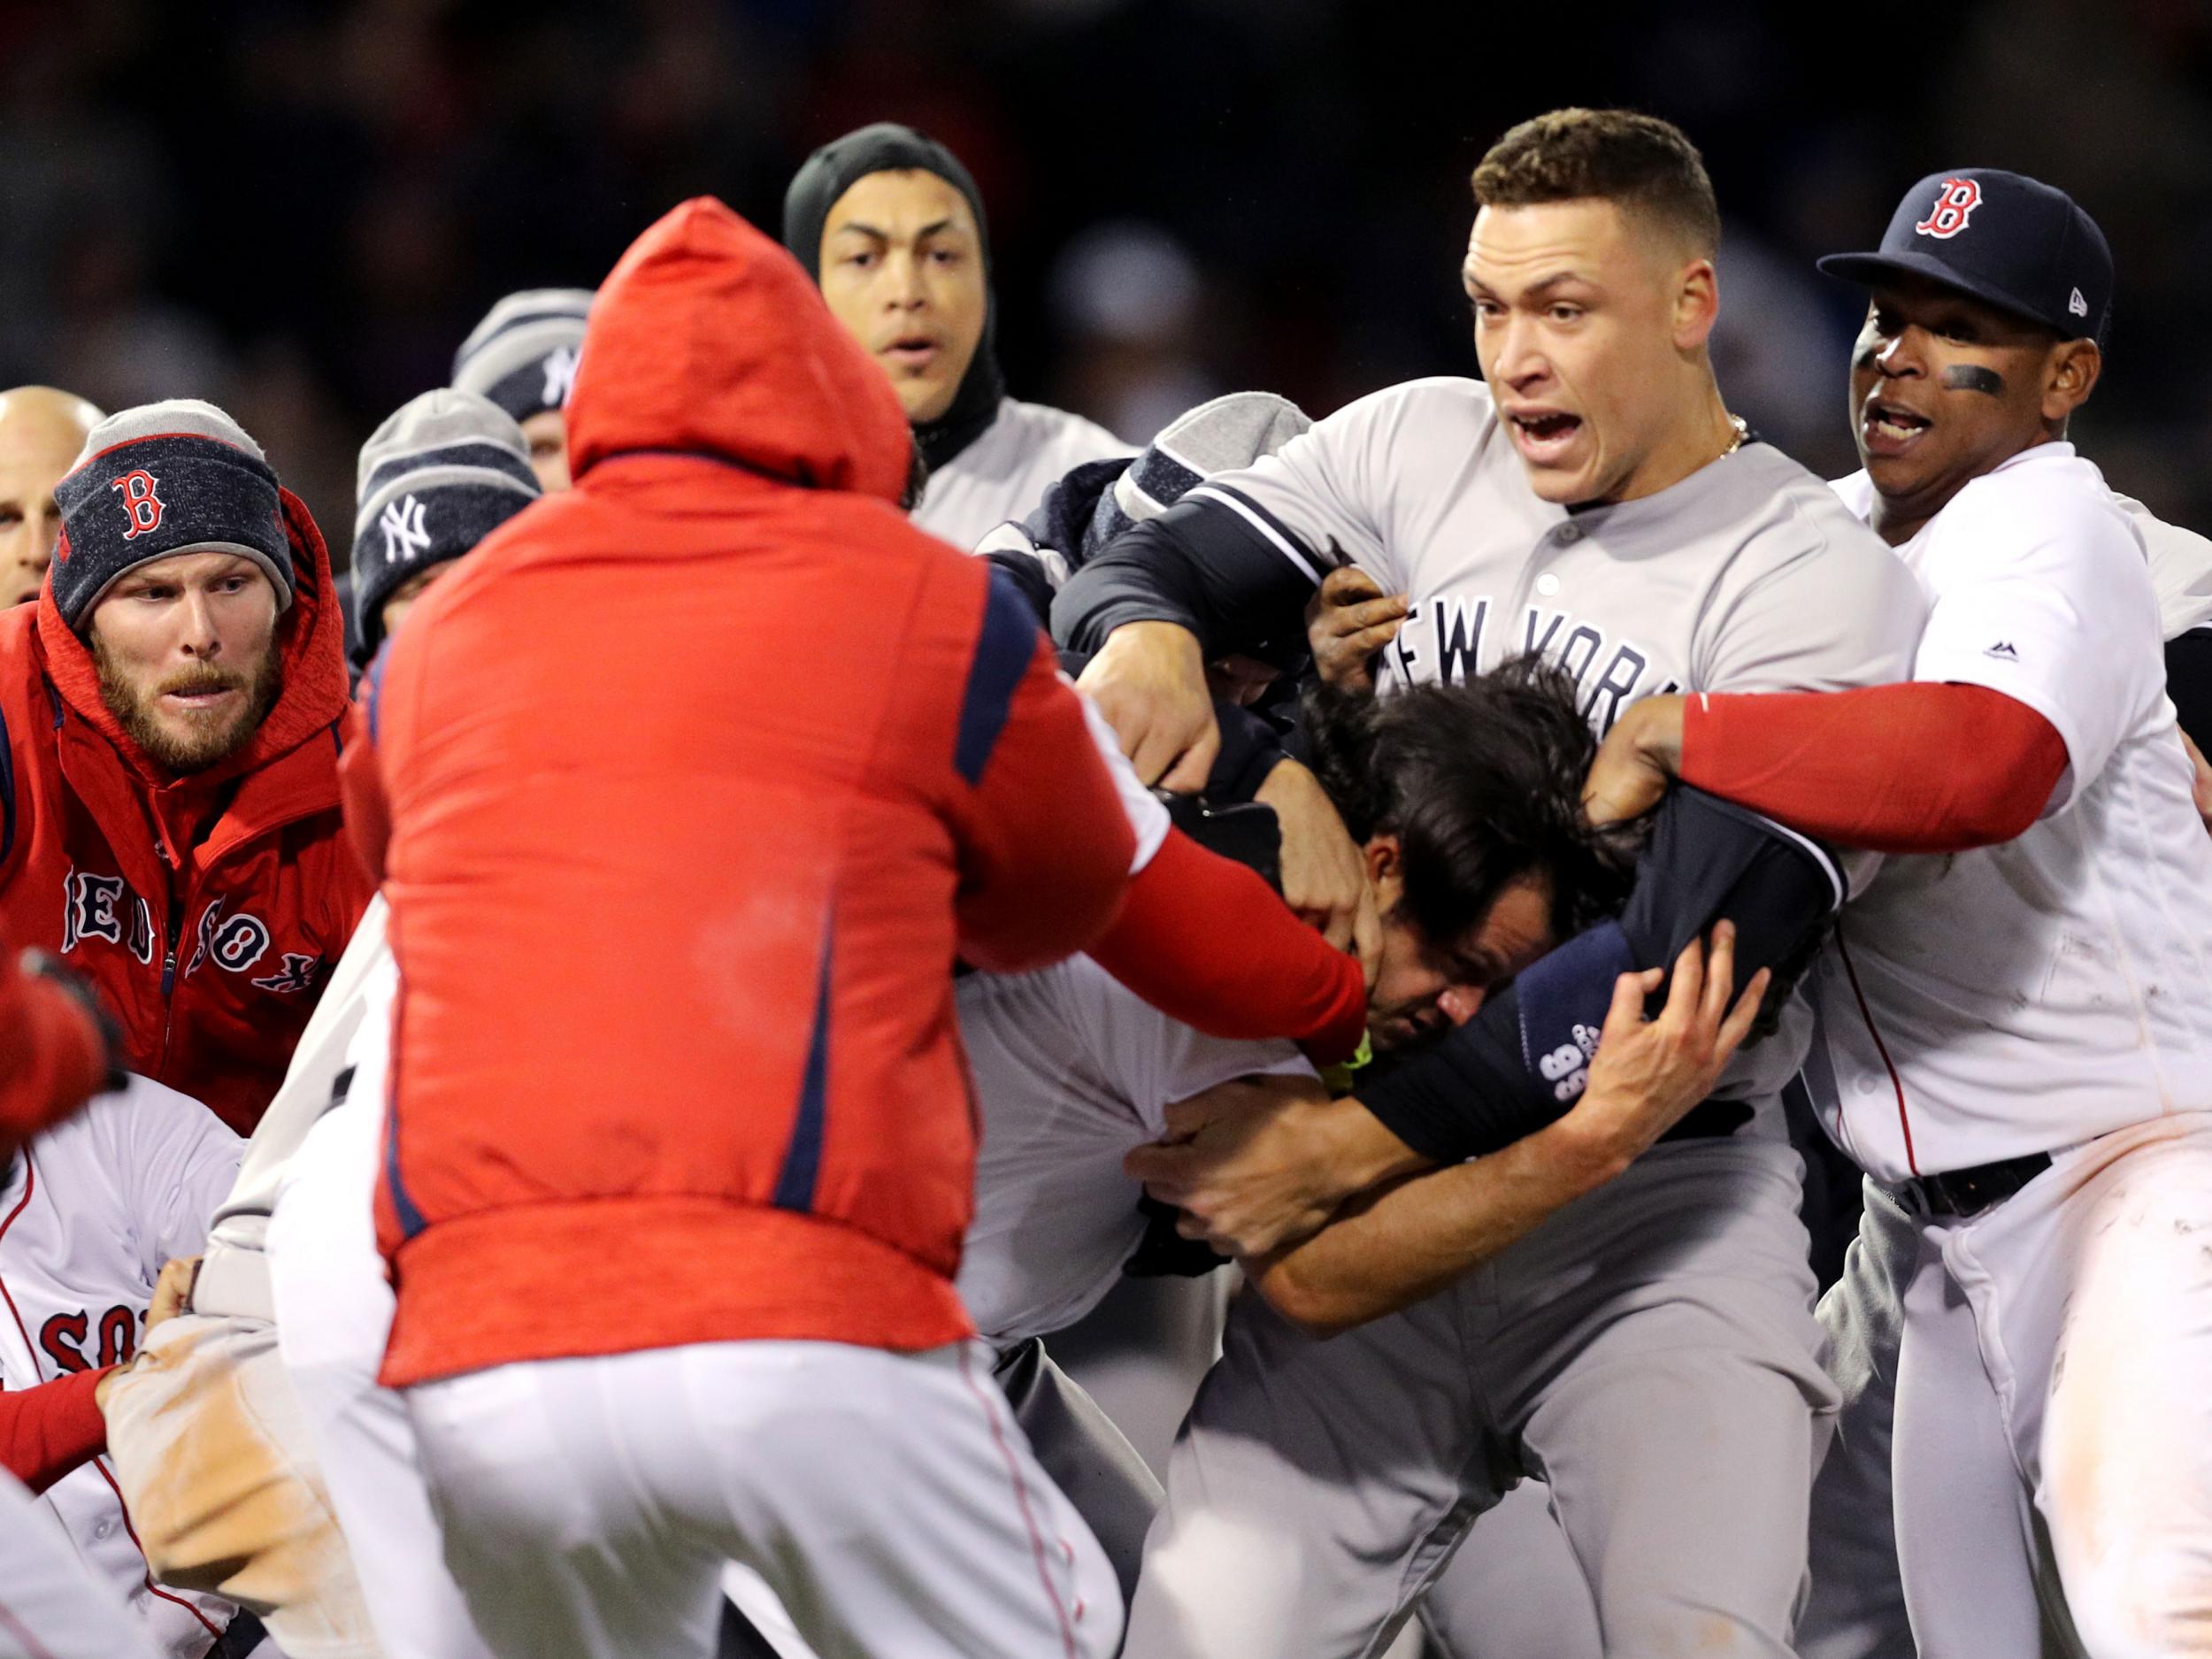 New York Yankees and Boston Red Sox brawl after batter hit by 98mph pitch, The Independent